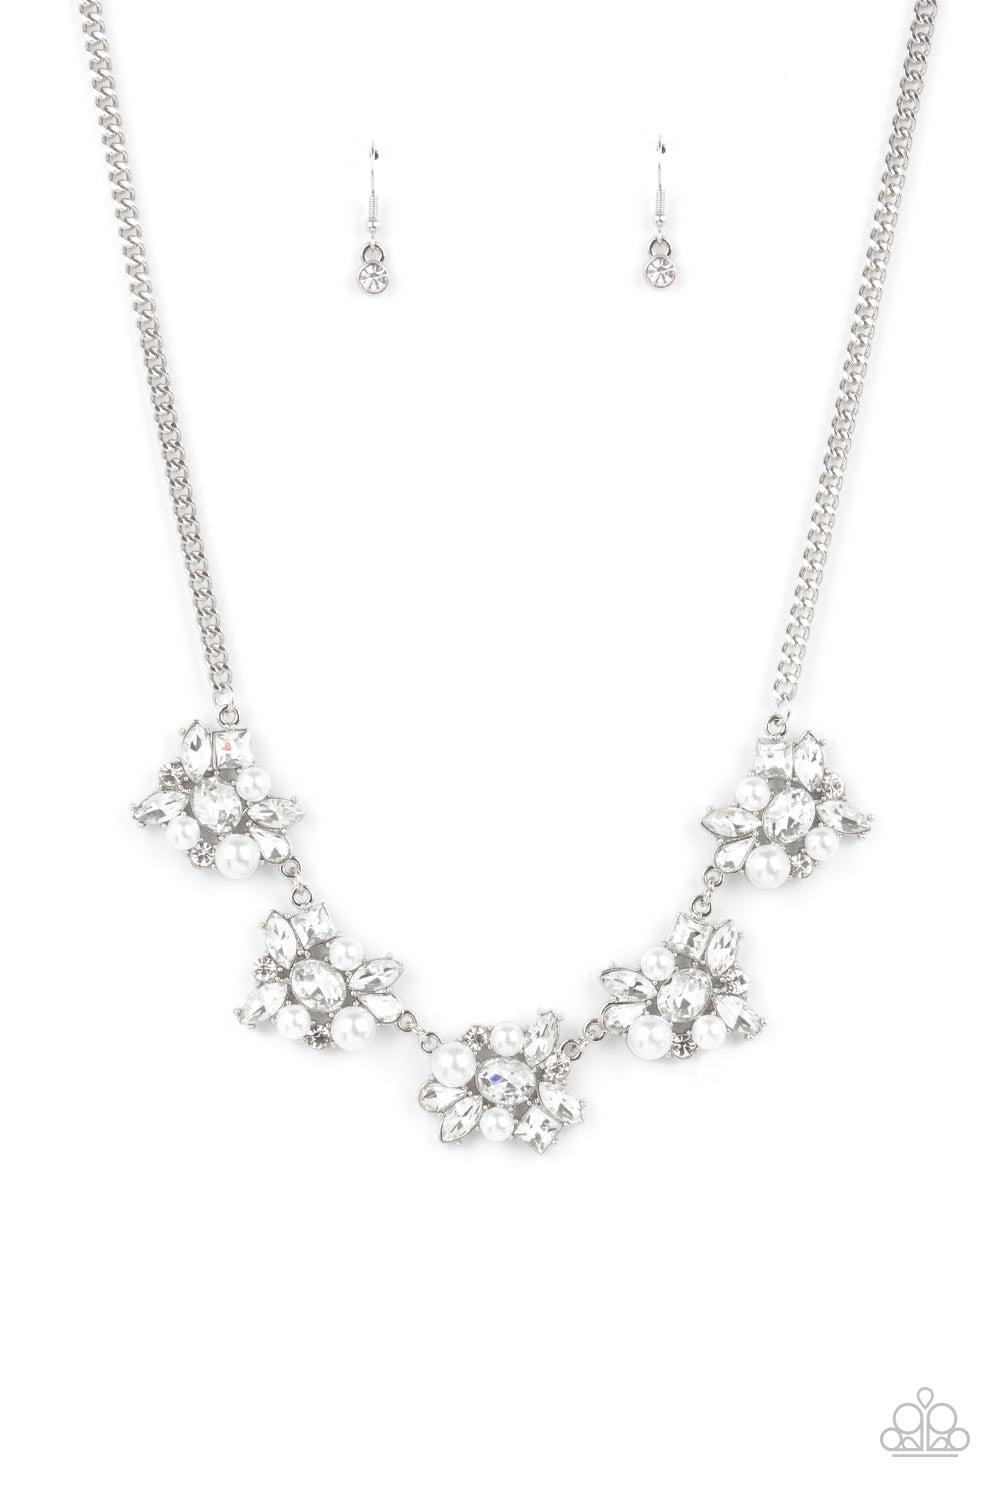 Paparazzi Accessories - HEIRESS of Them All - White Necklace - EMP Exclusive 2021